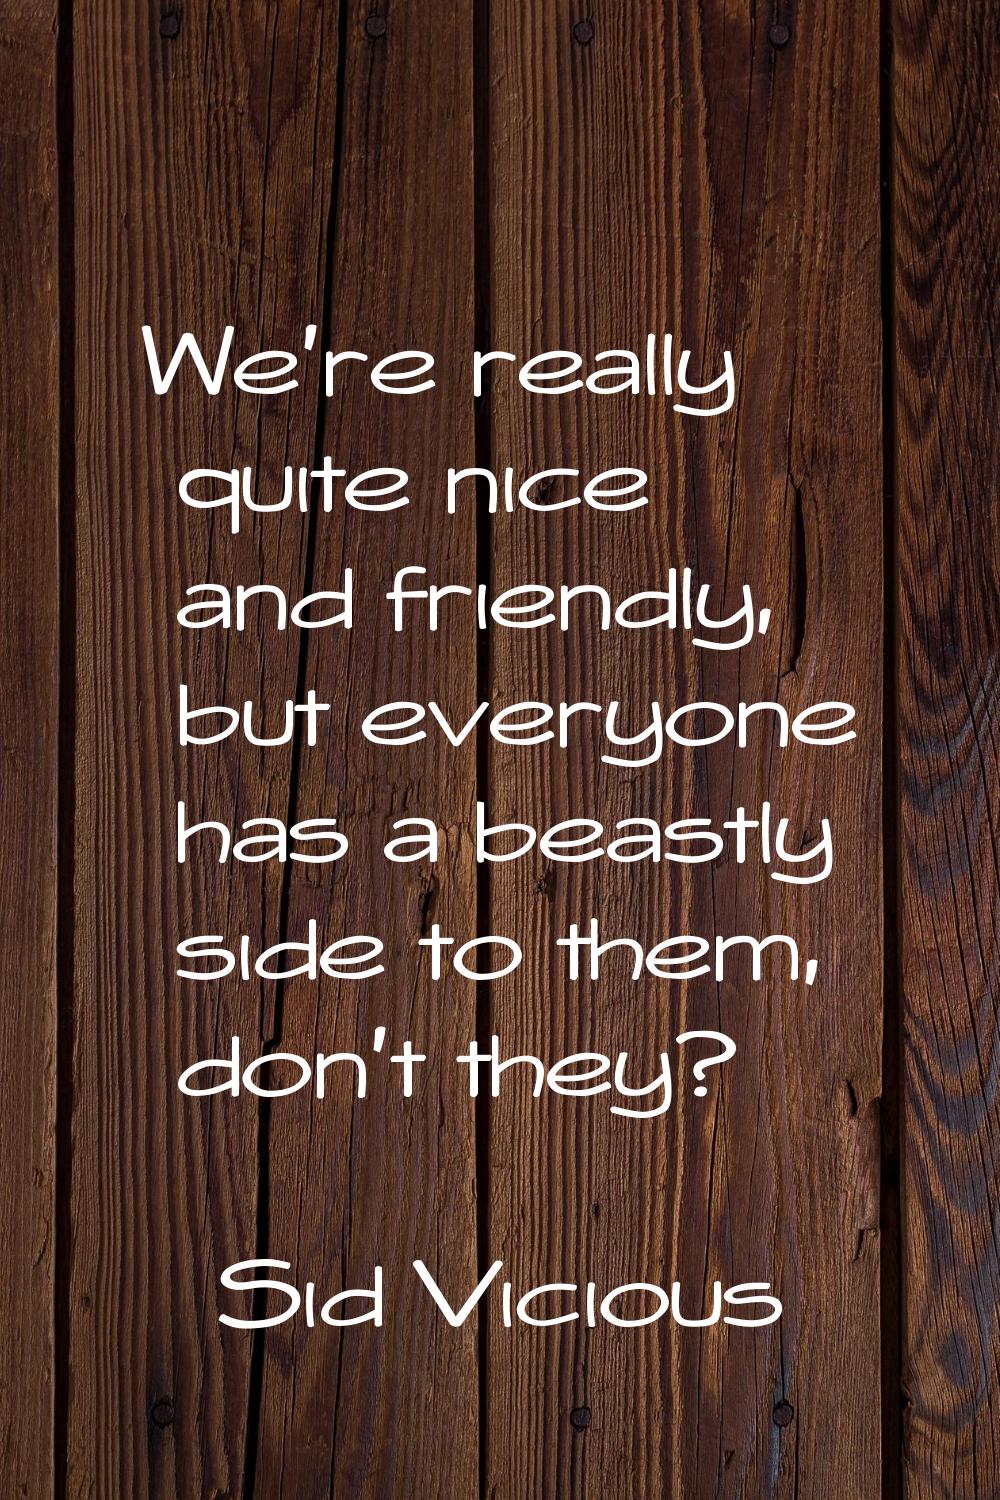 We're really quite nice and friendly, but everyone has a beastly side to them, don't they?